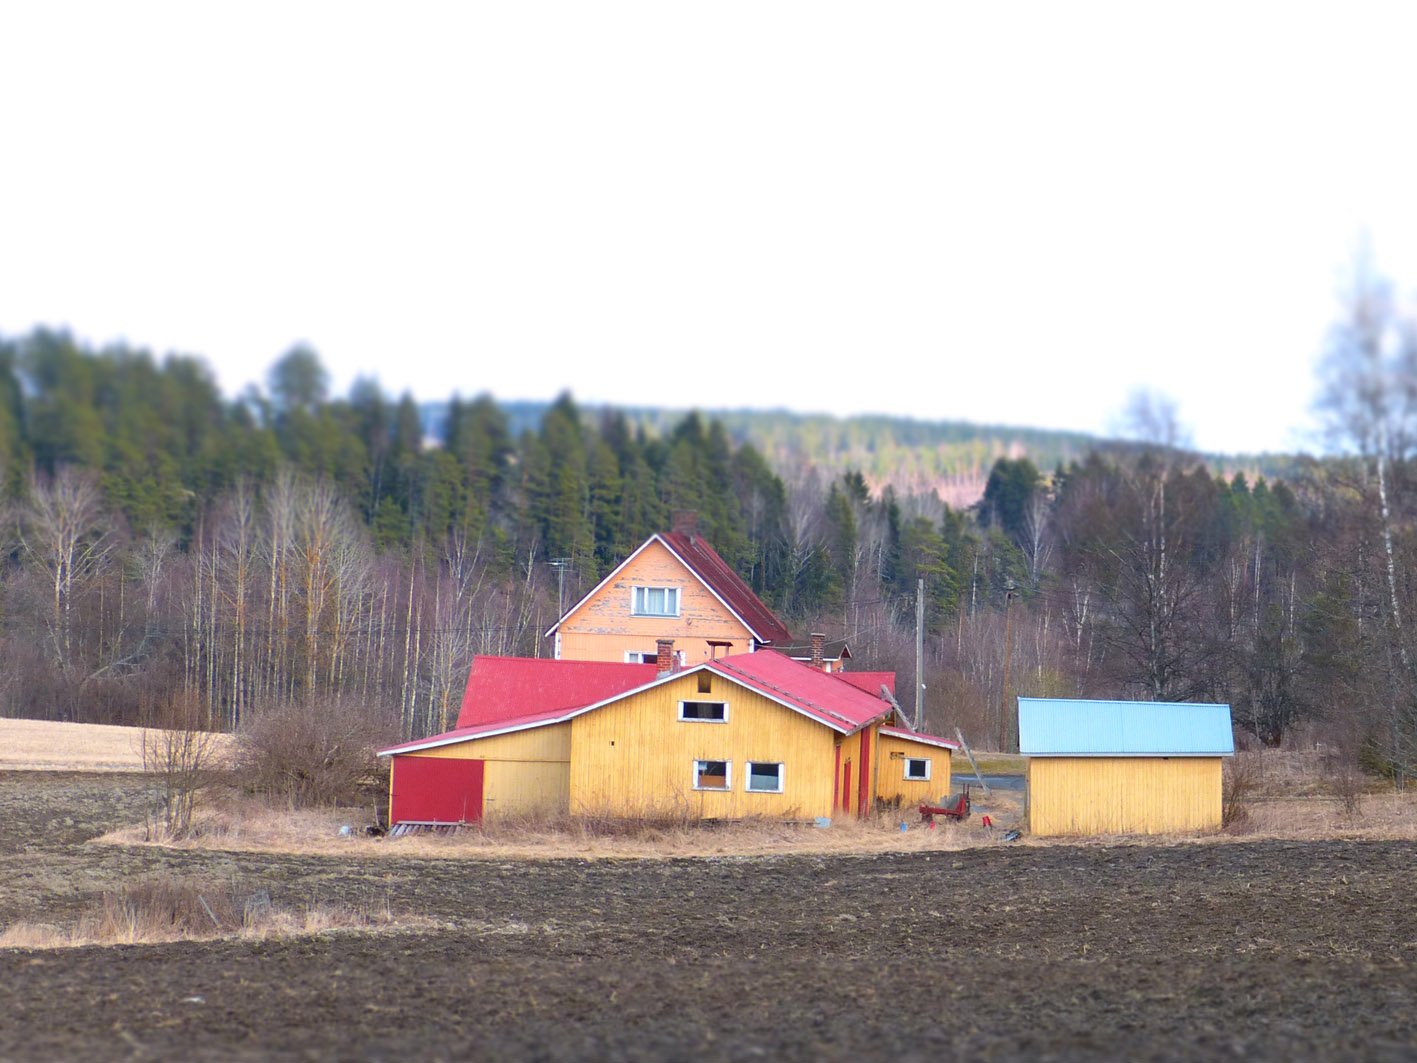 Afternoon-walk-with-houses-finland-countryside.jpg